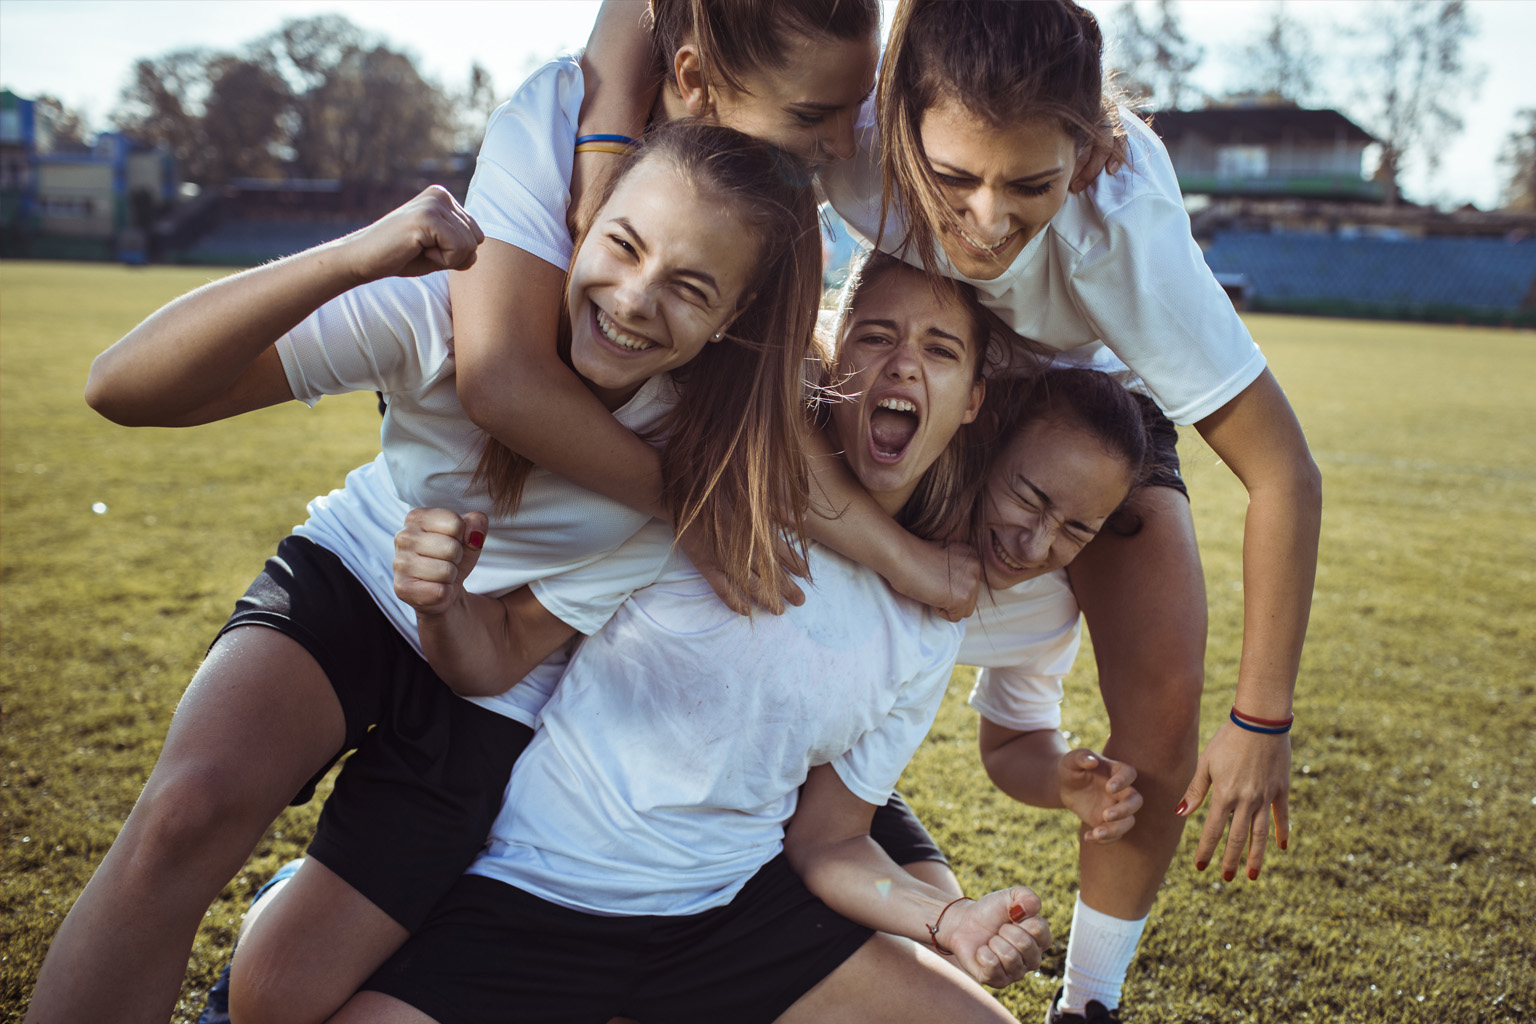 A group of young women crowd together in celebration on a sporting field.